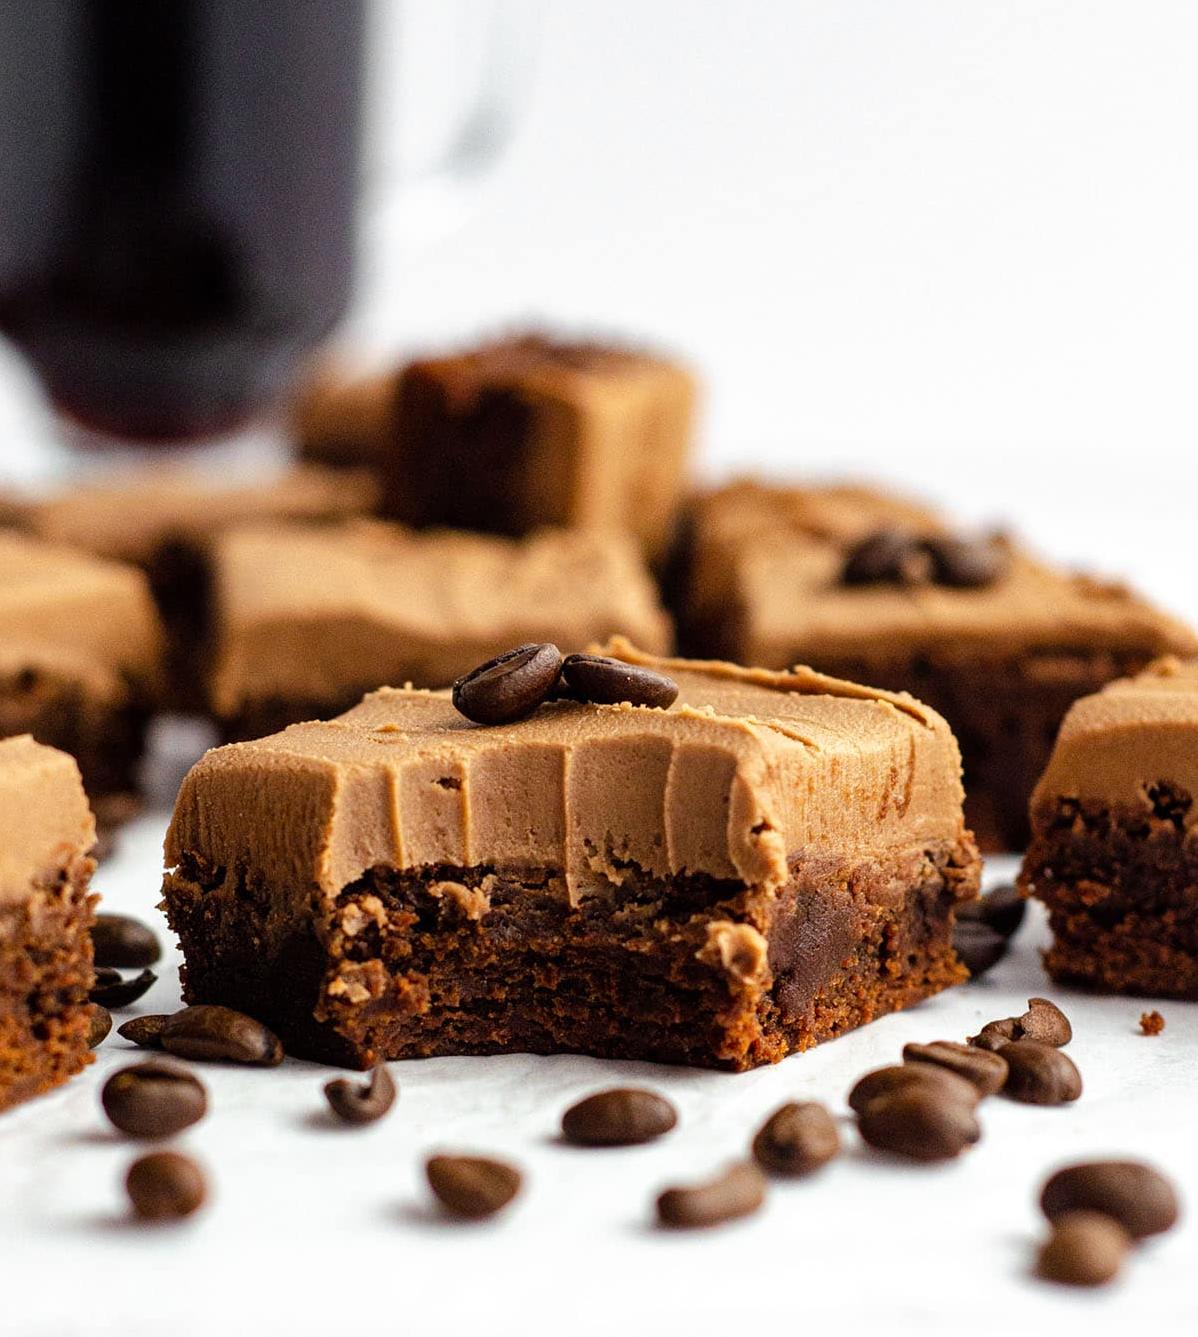  The combination of dark chocolate and mocha creates a deep and complex flavor in every bite